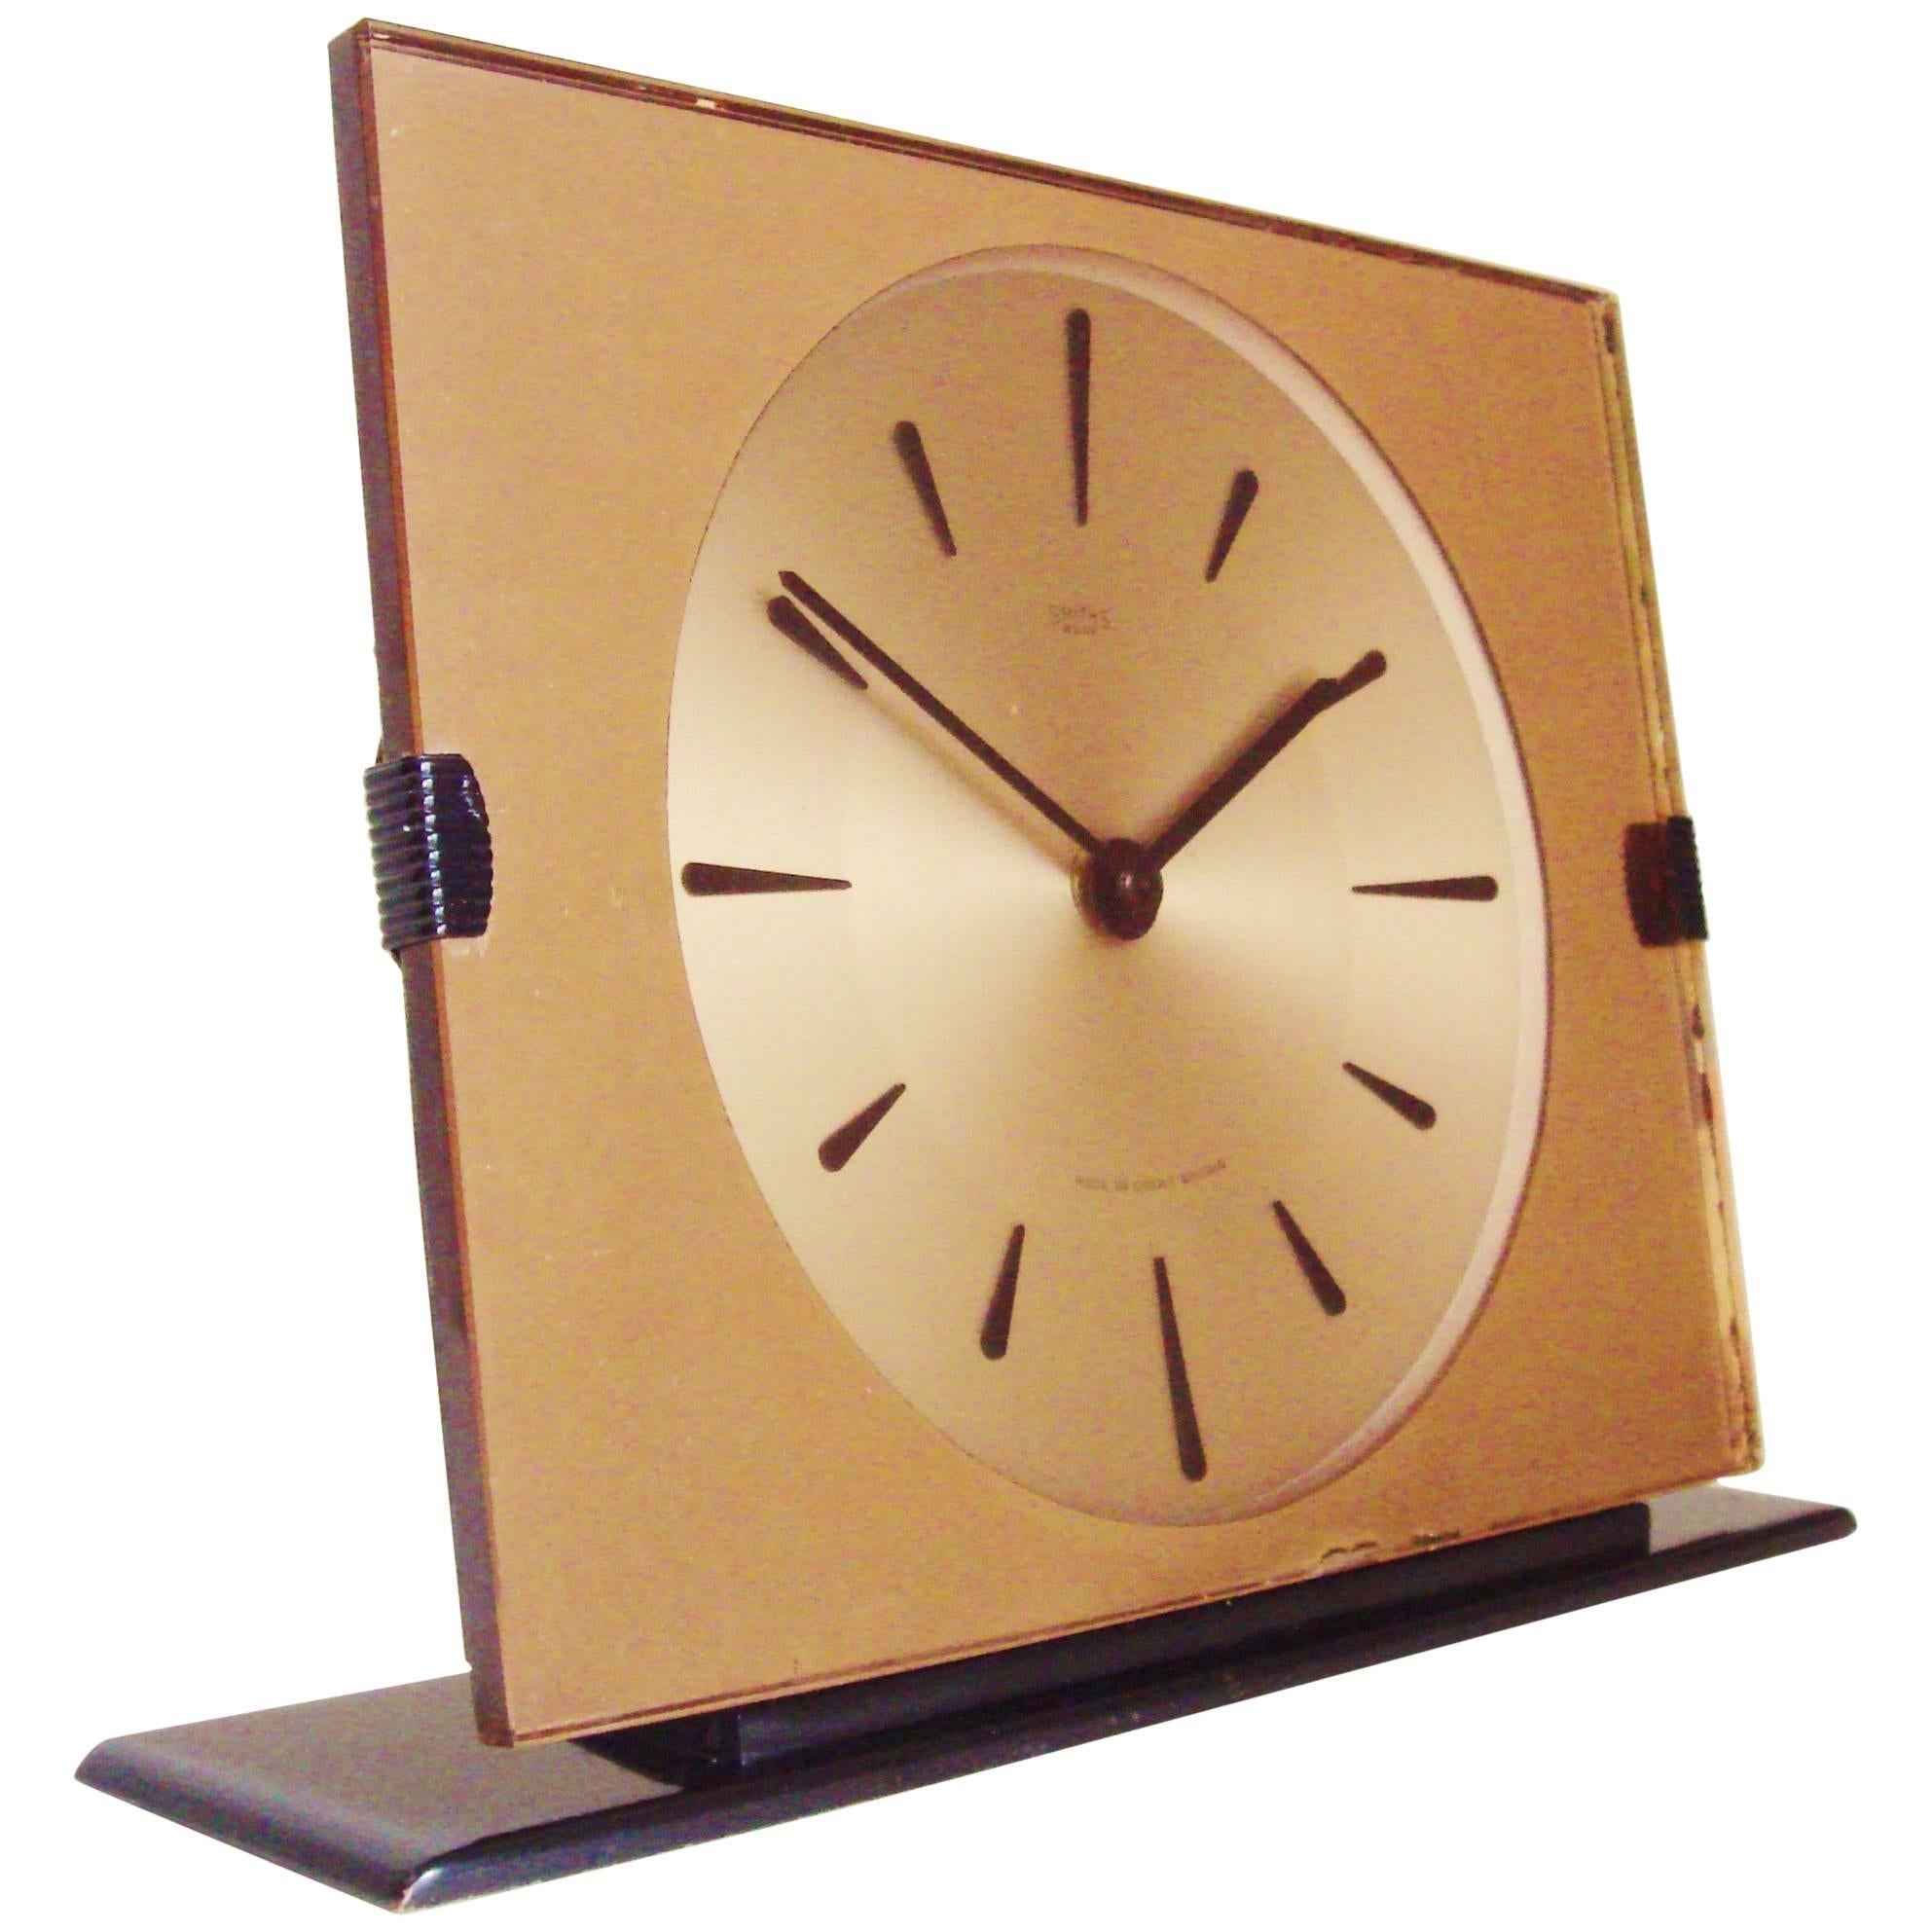 English Mid-Century Peach Mirror, Lucite and Enamel Mechanical Clock by Smiths